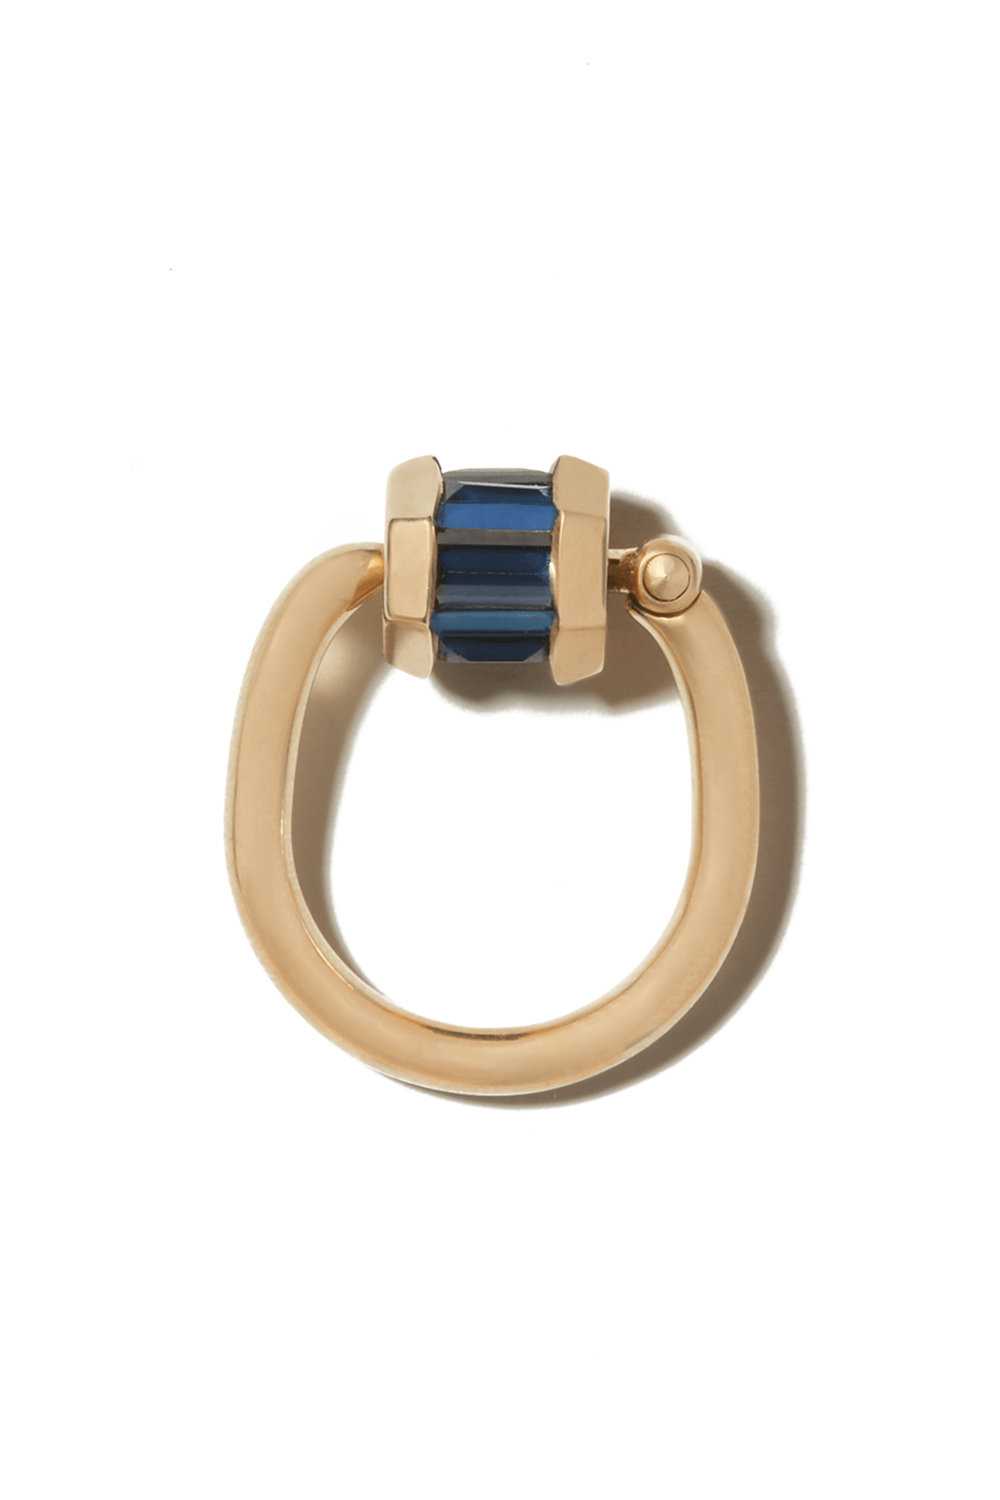 MARLA AARON-Total Baguette Trundle Lock Ring-YELLOW GOLD